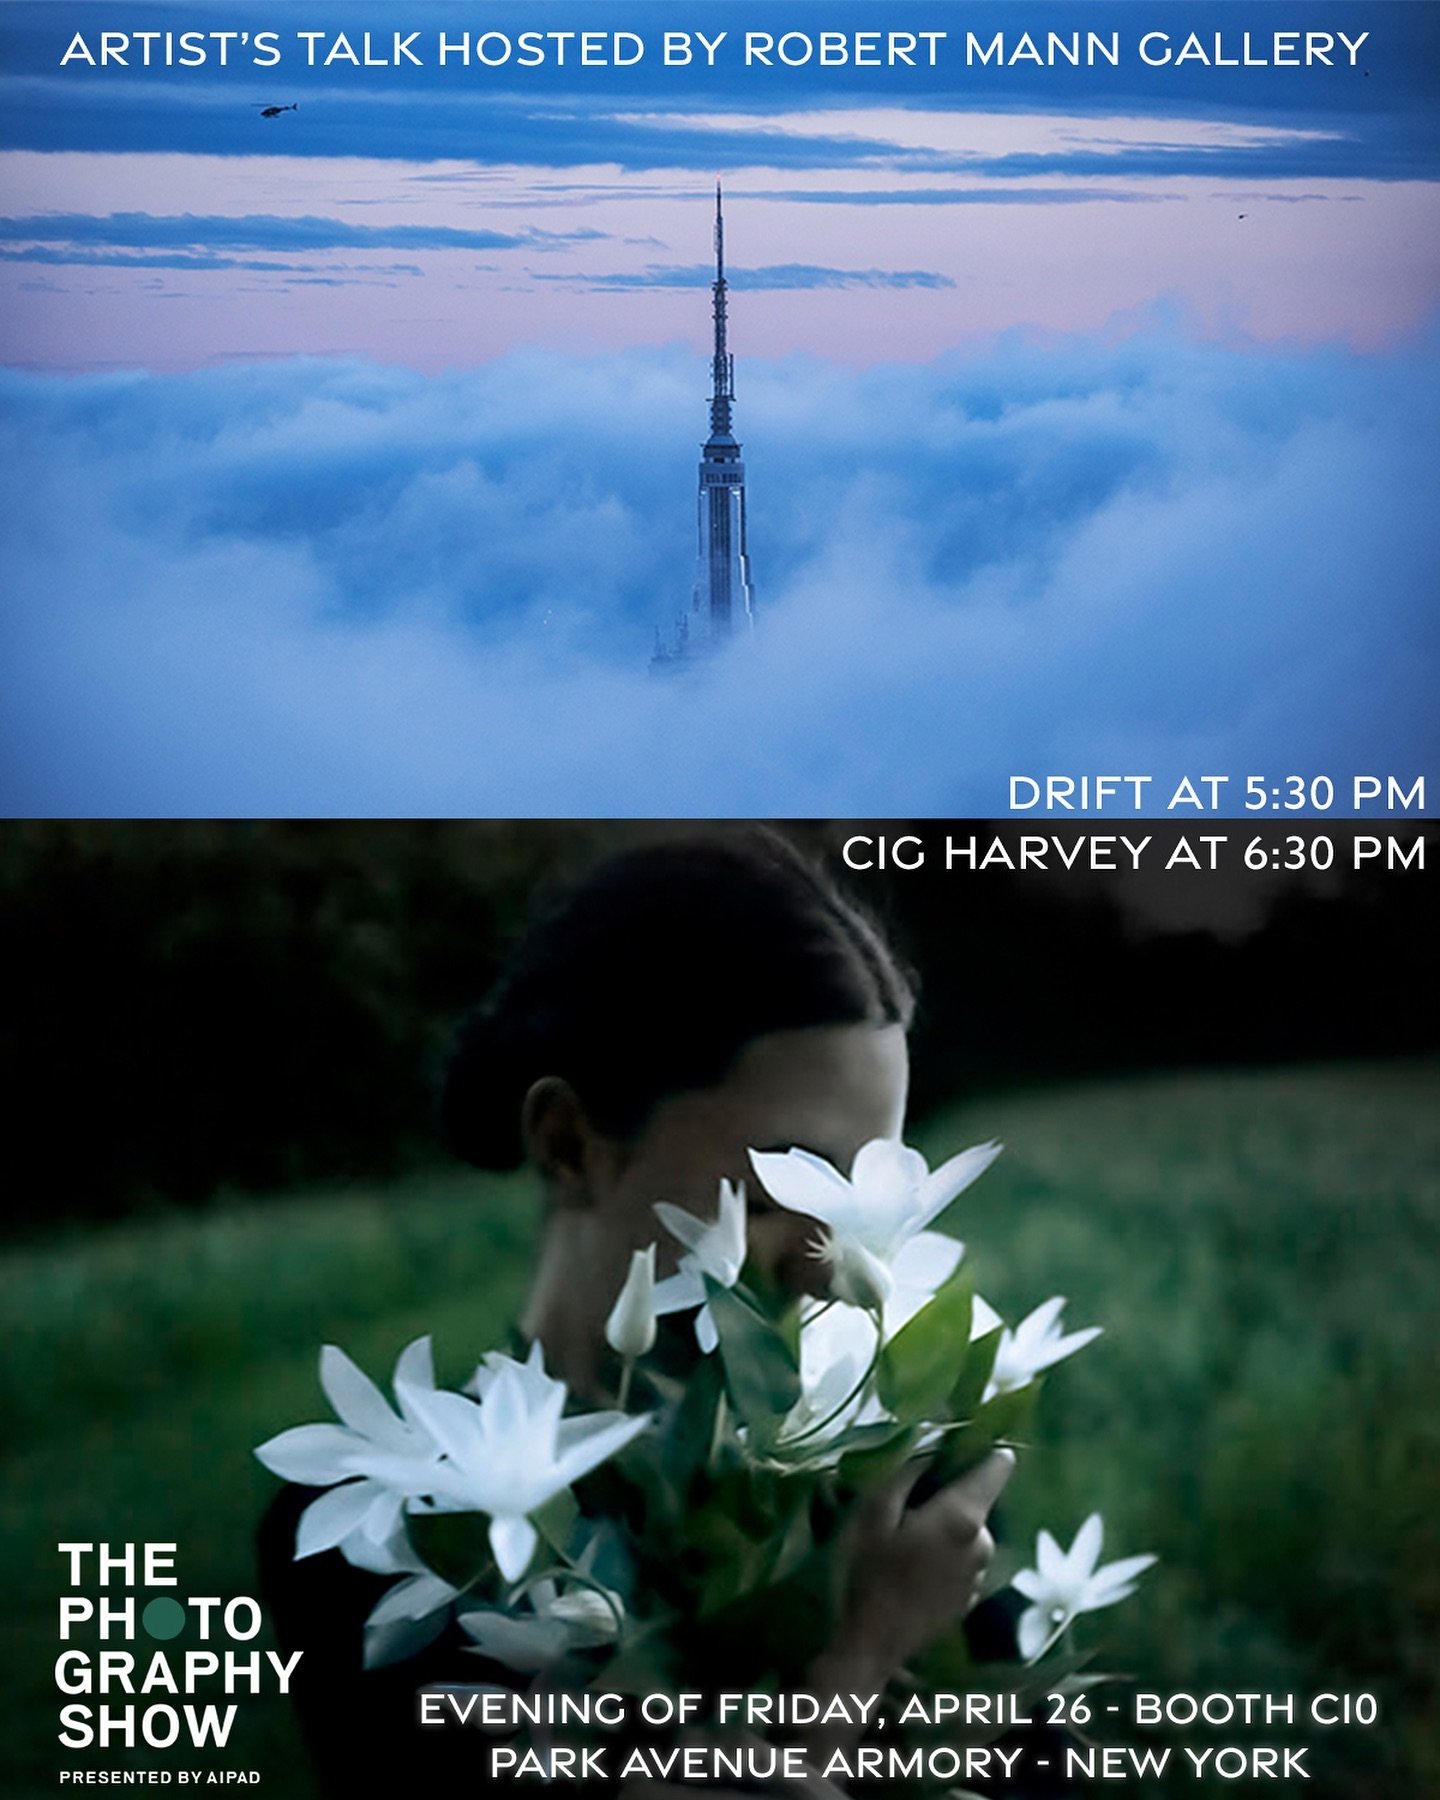 Join us this Friday evening at The Photography Show with two of our represented artists: Drift and Cig Harvey

The artists will share how their personal experiences are incorporated into their visual narrative. A Q&amp;A session will happen after the